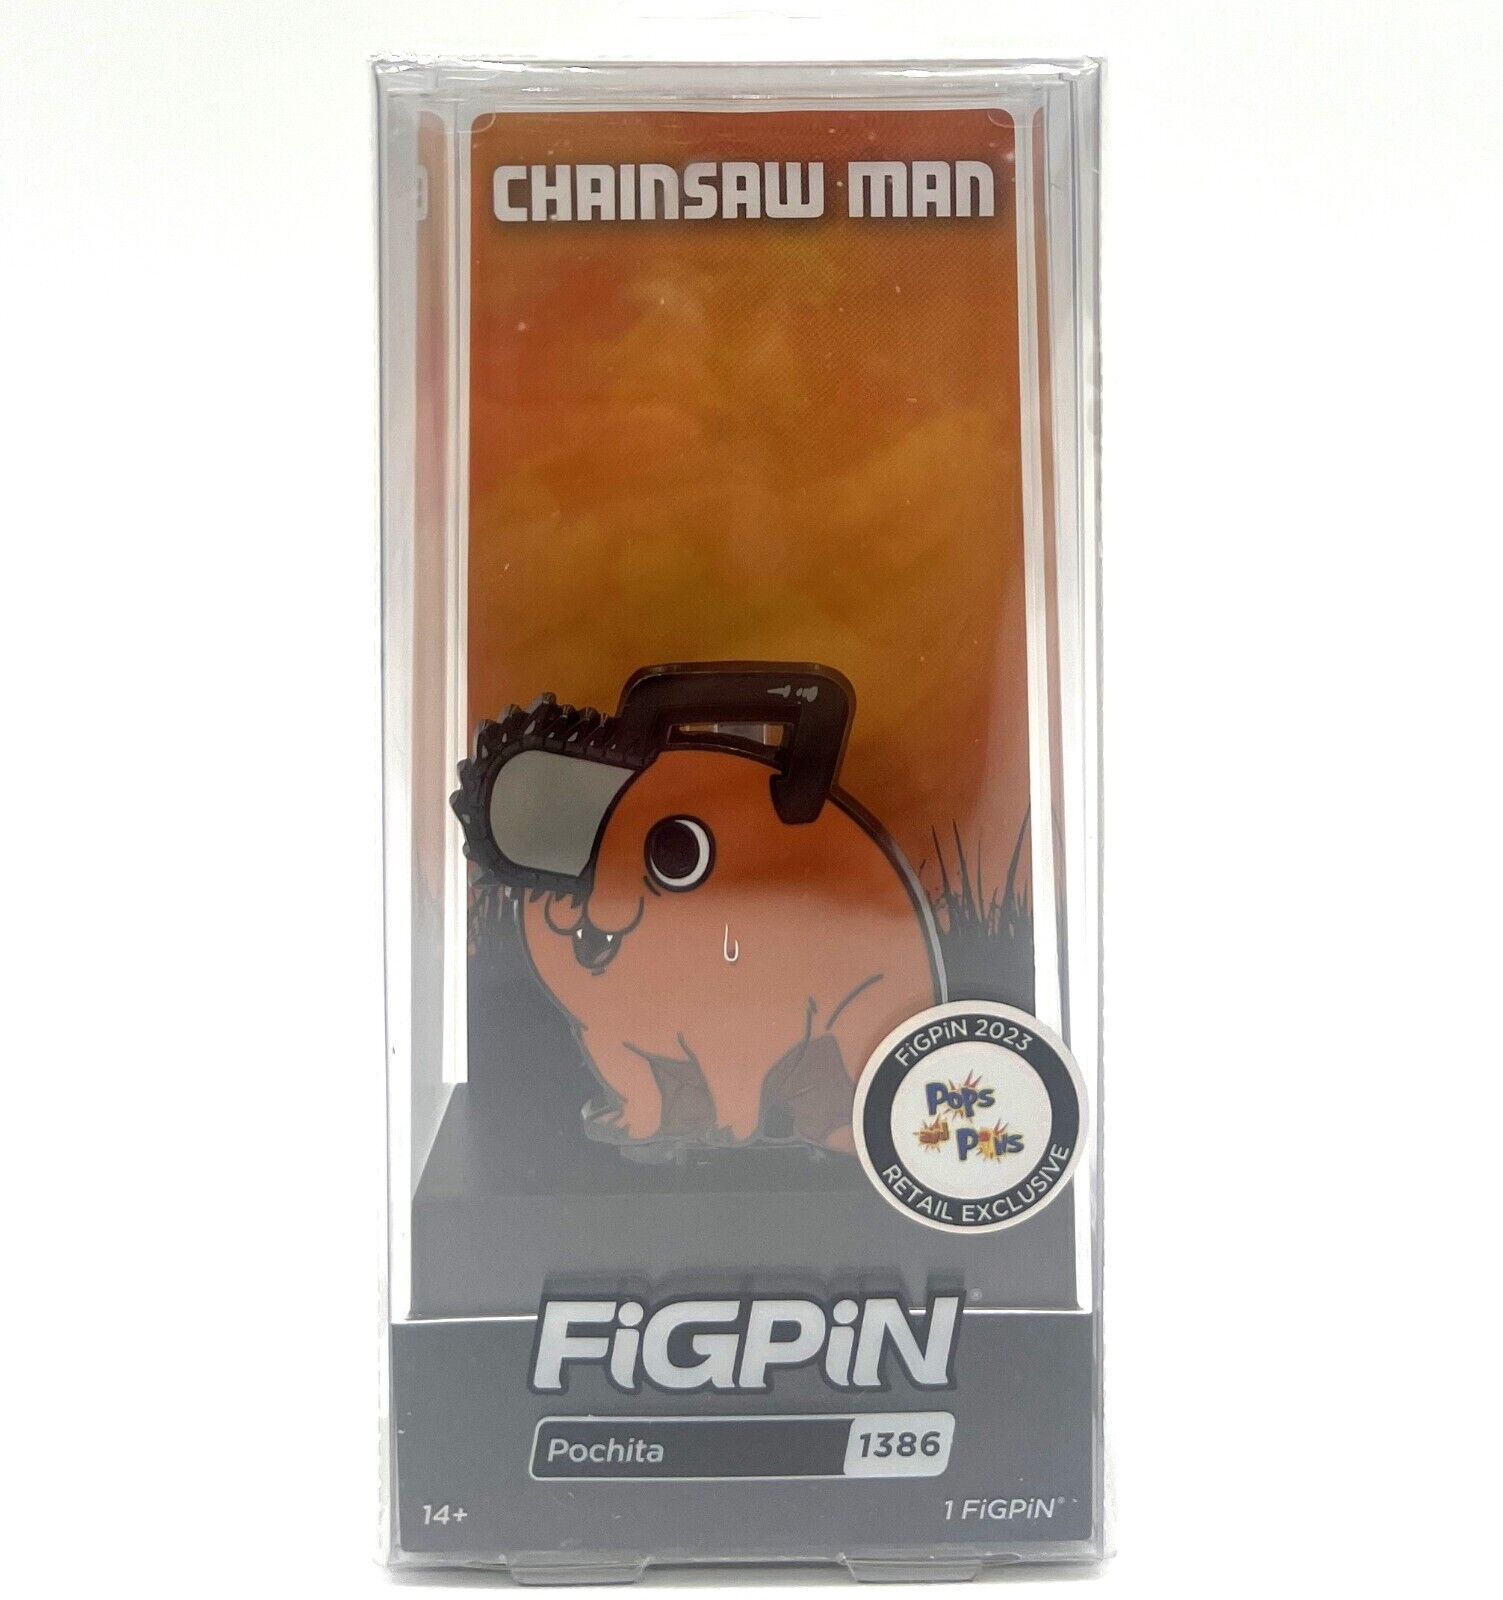 FiGPiN Chainsaw Man Pochita #1386 Pops and Pins Exclusive LE1000 Collectible Pin